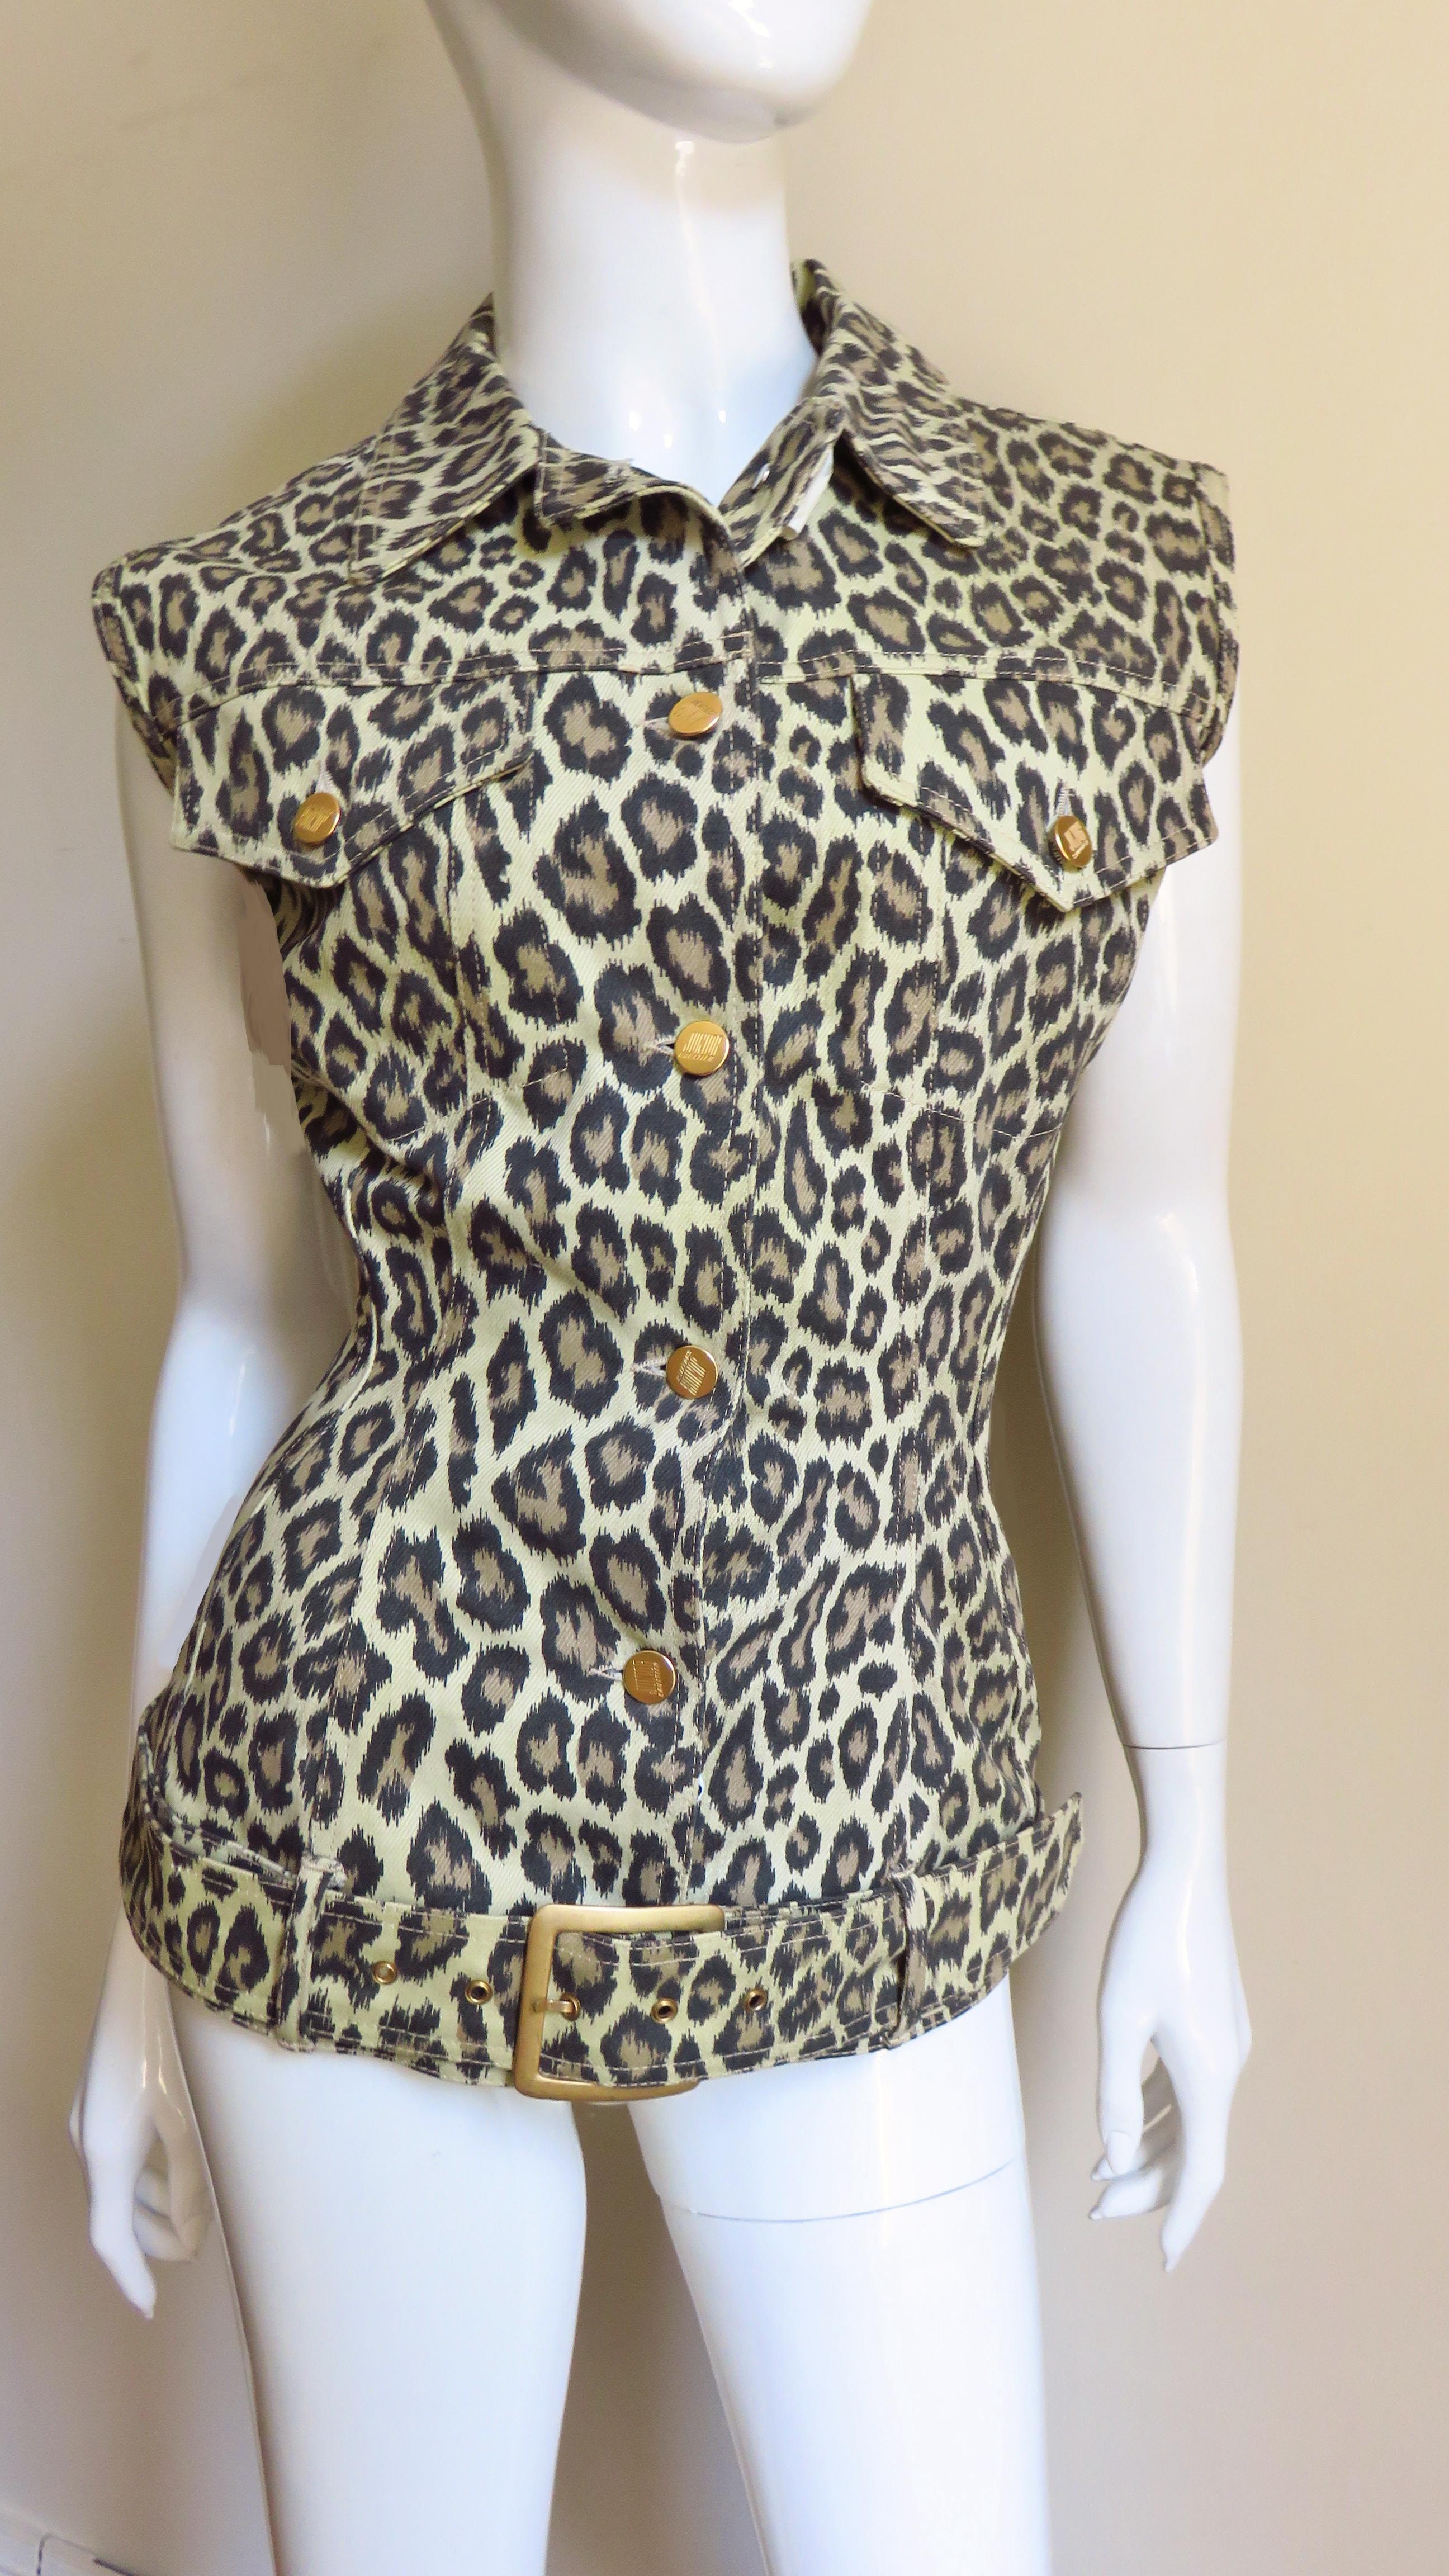 A fabulous leopard print denim sleeveless vest, jacket, top from Jean Paul Gaultier's Junior Gaultier line. It is sleeveless with a collar, button chest pockets, gold Gaultier inscribed metal buttons up the front and it has a hip belt with a metal